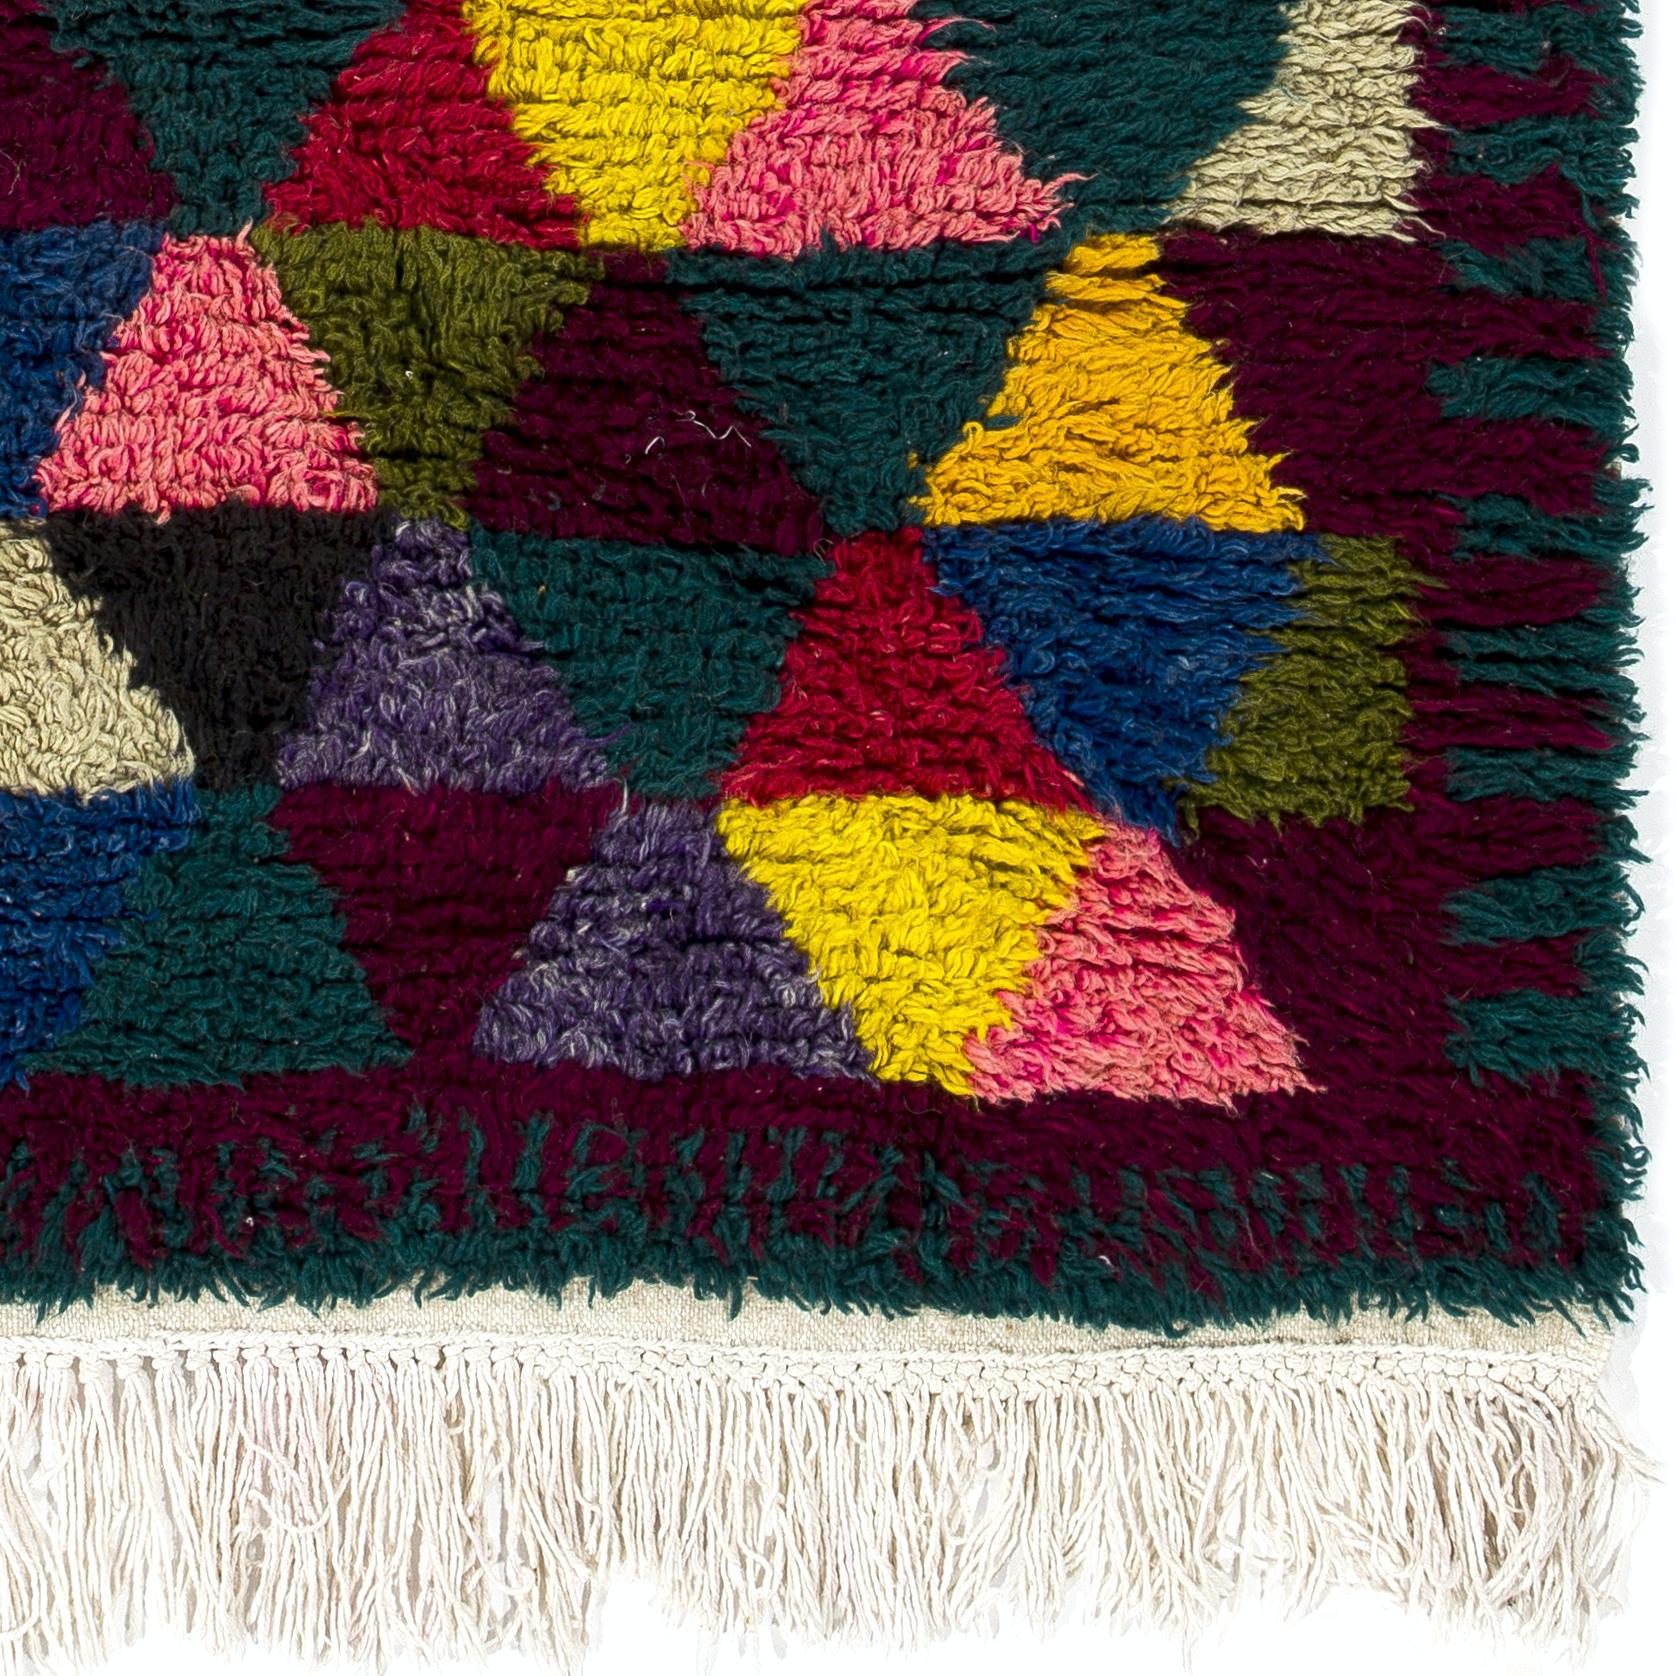 Hand-Knotted 4.2x5.5 Ft Vibrant Handmade Tulu Rug. Soft Cozy Wool Pile. Vintage Wall Hanging For Sale